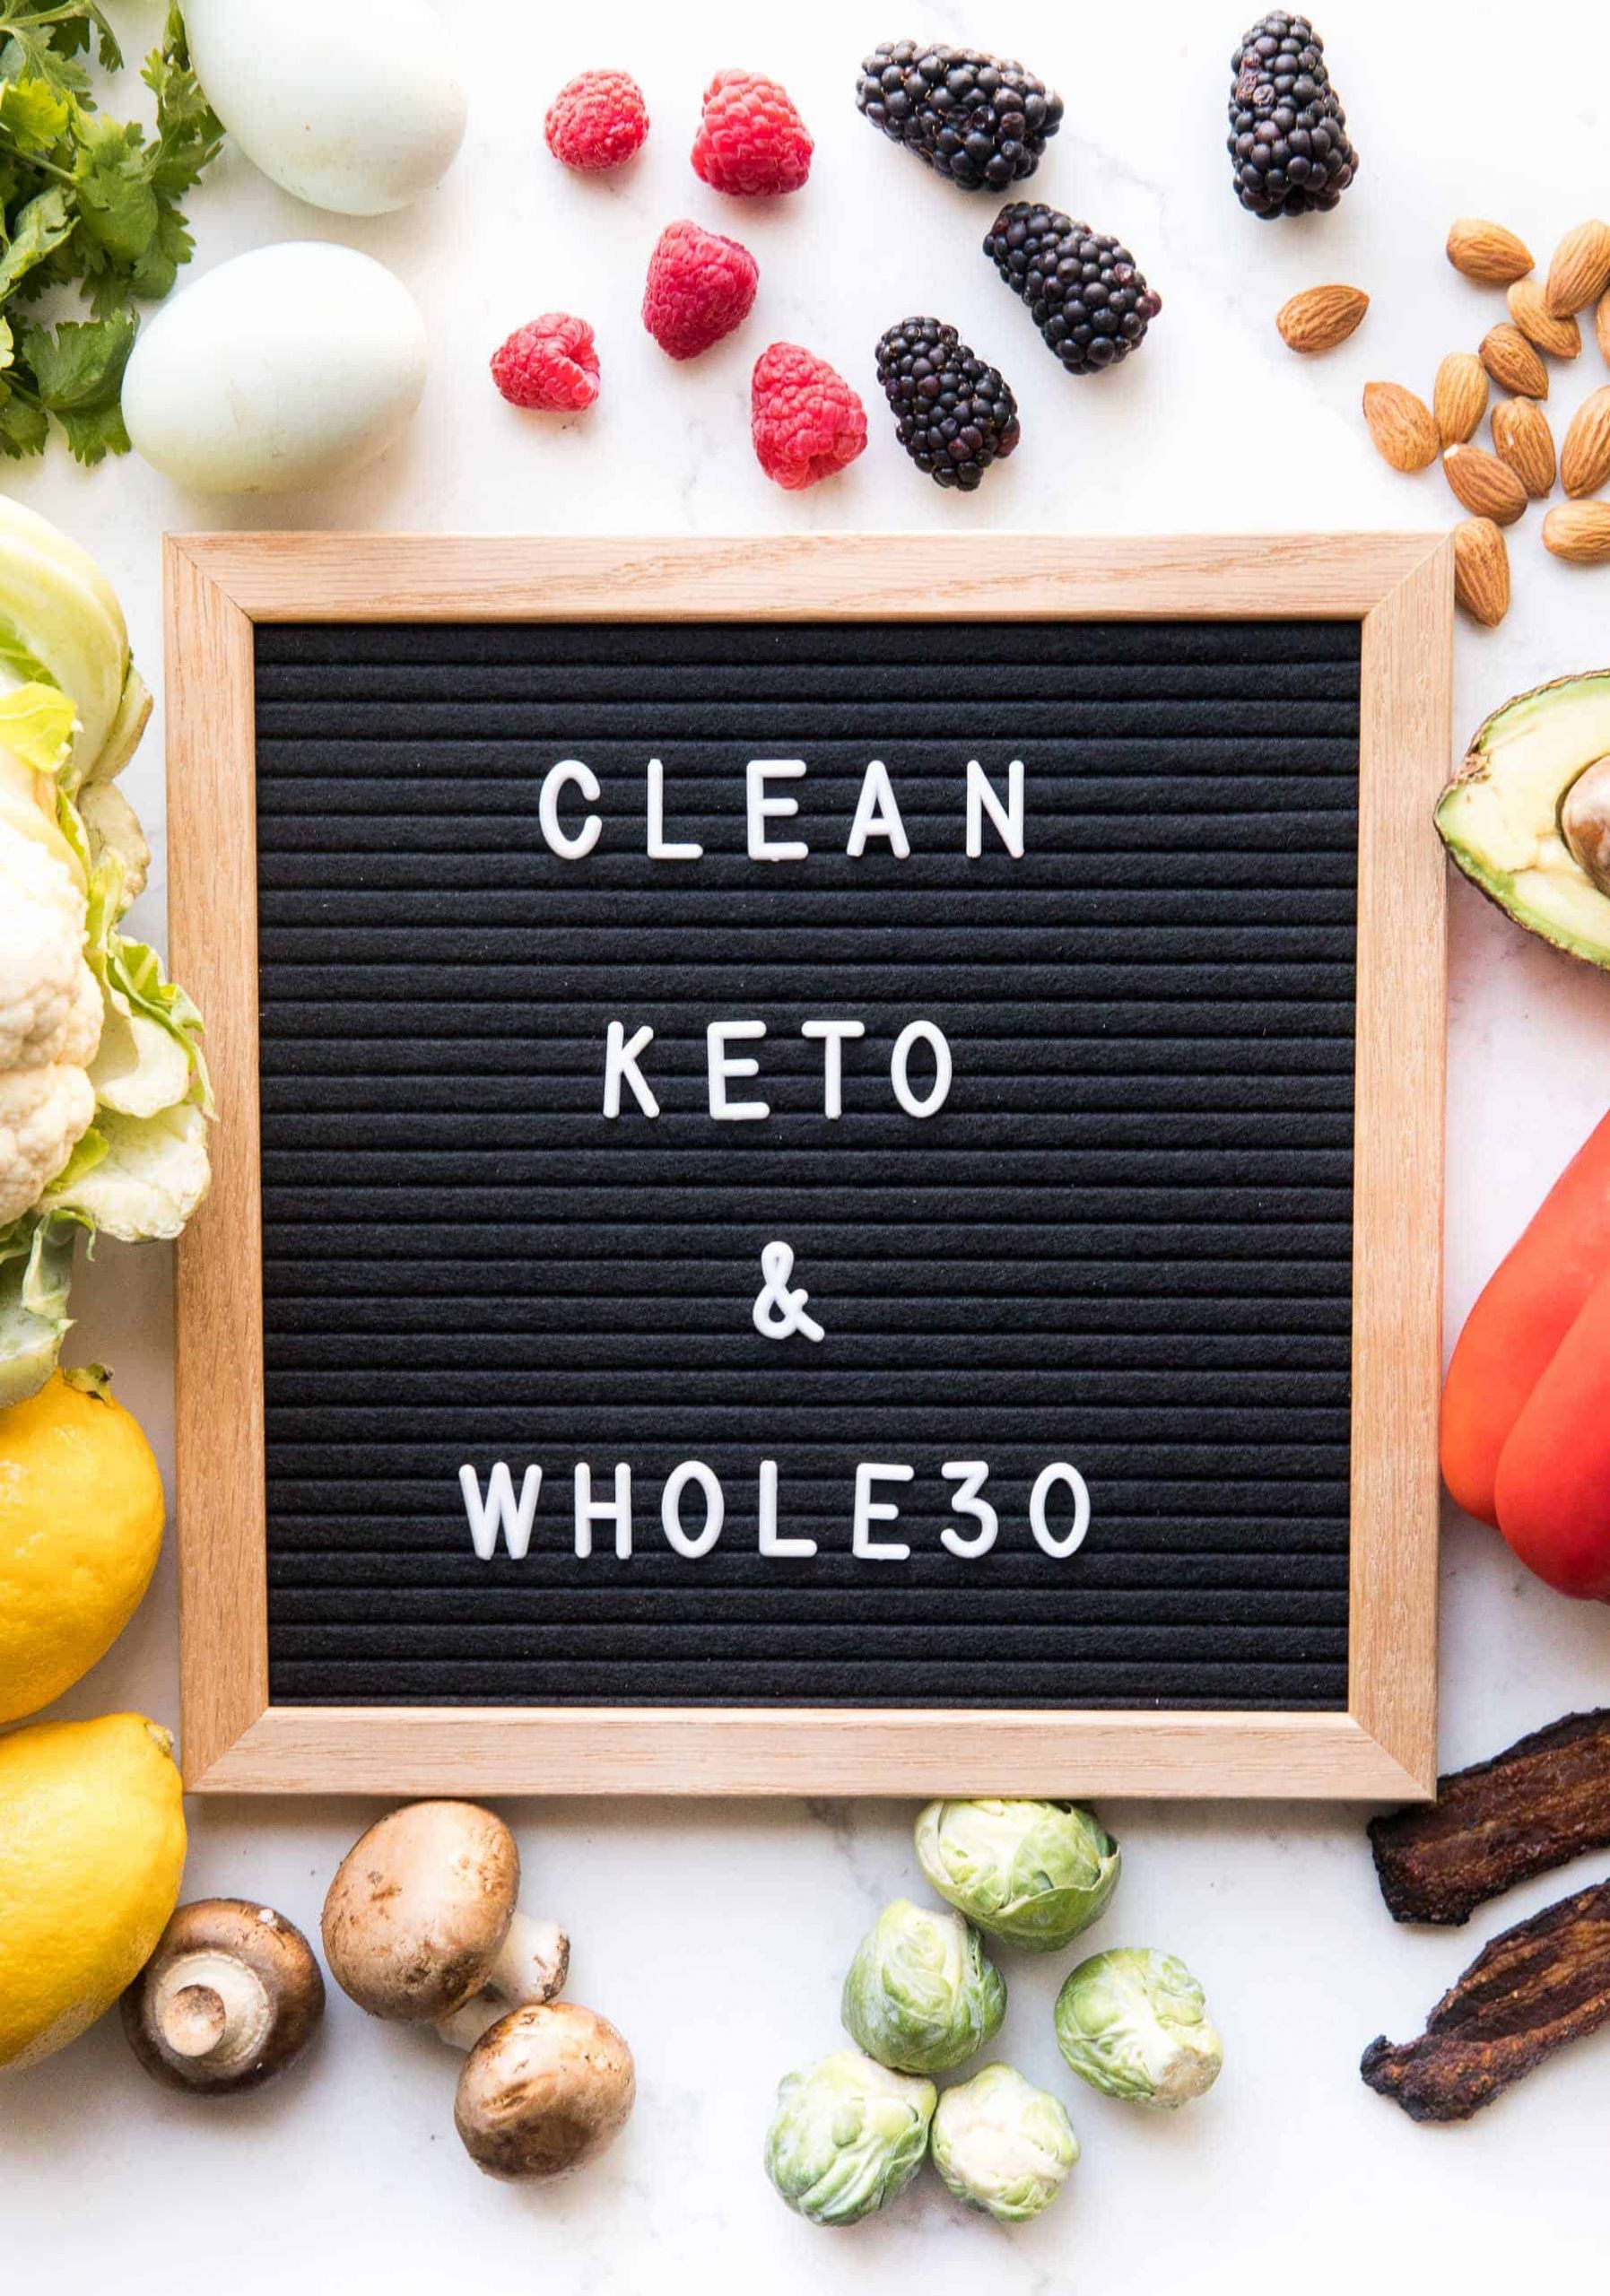 Clean Keto Eating
 The Clean Keto Whole30 Foods I Eat Tastes Lovely